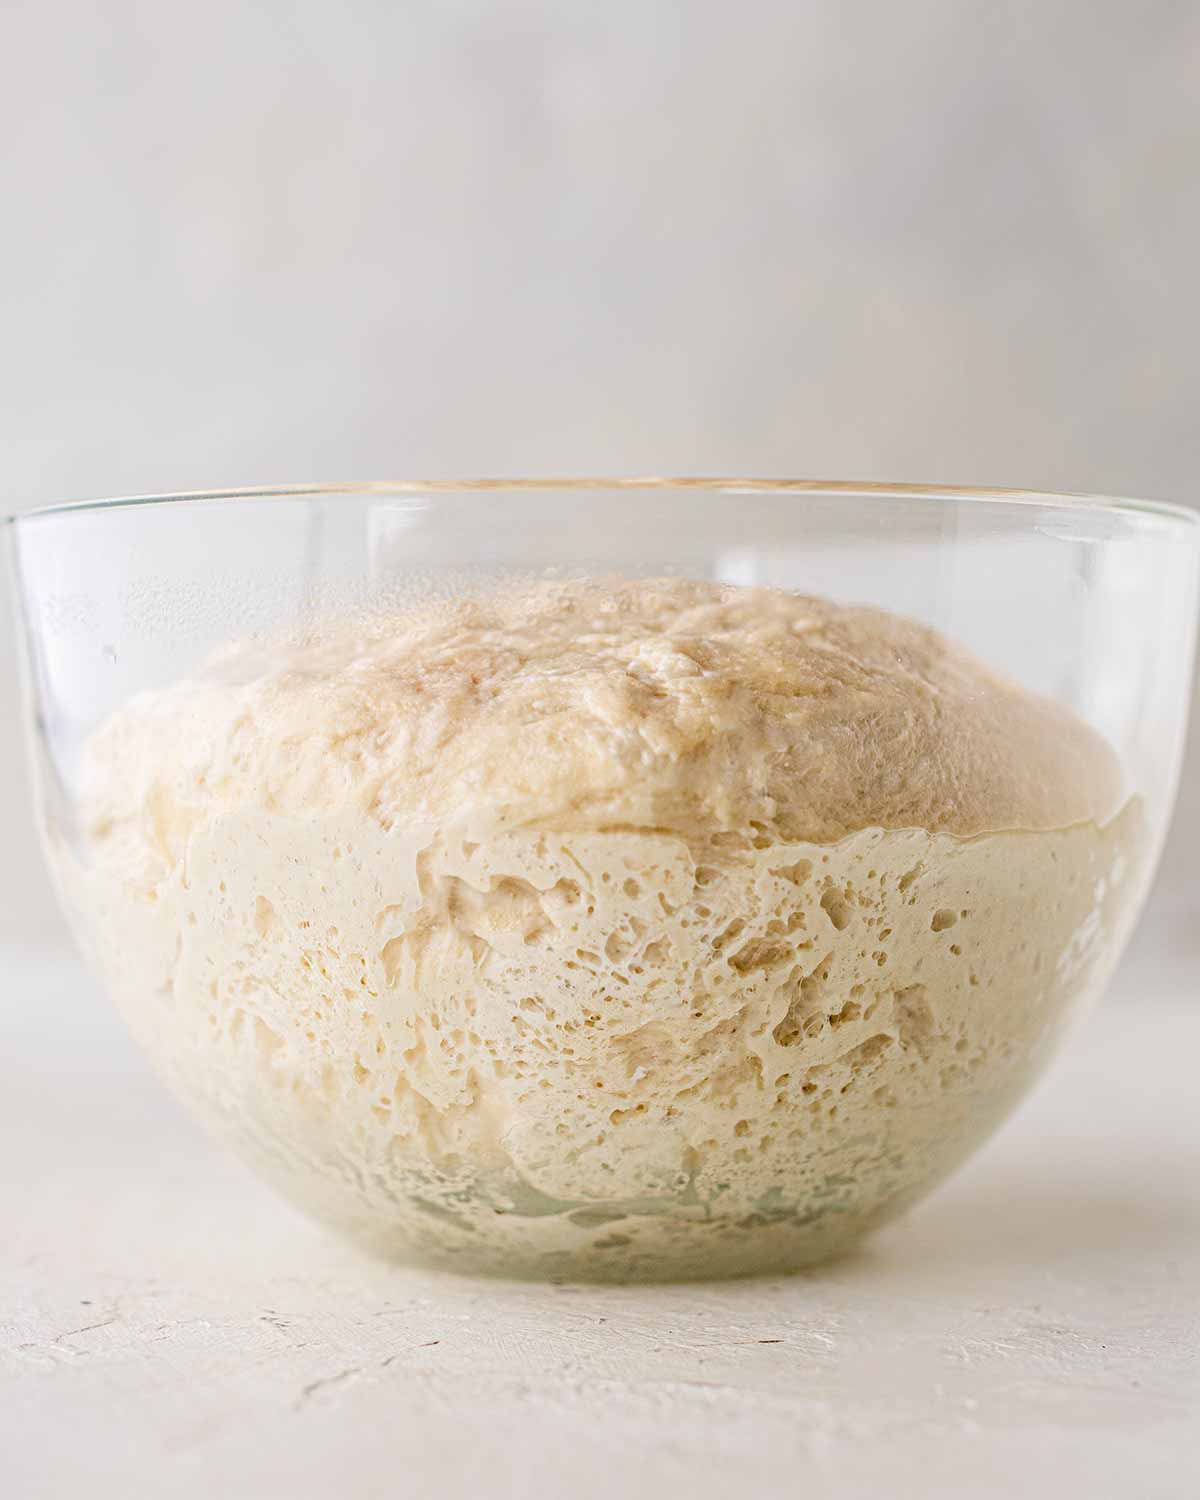 Puffy brioche dough in glass bowl showing little bubbles on the side.